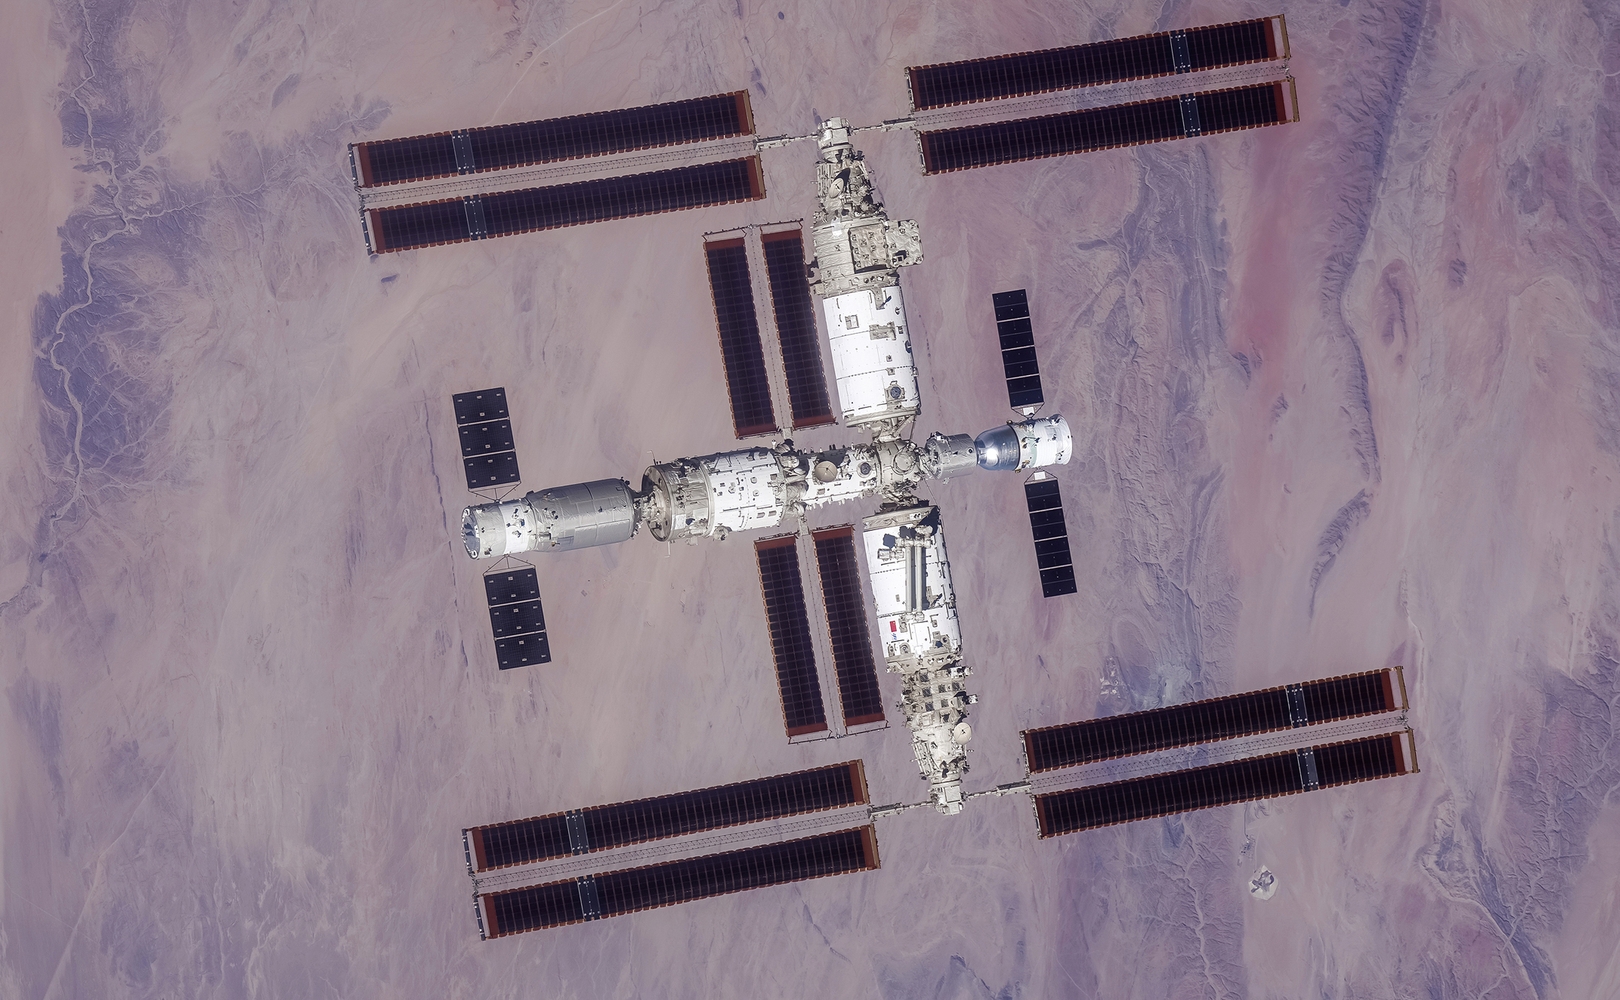 Chinese space station photographed from orbit.  The first of these pictures